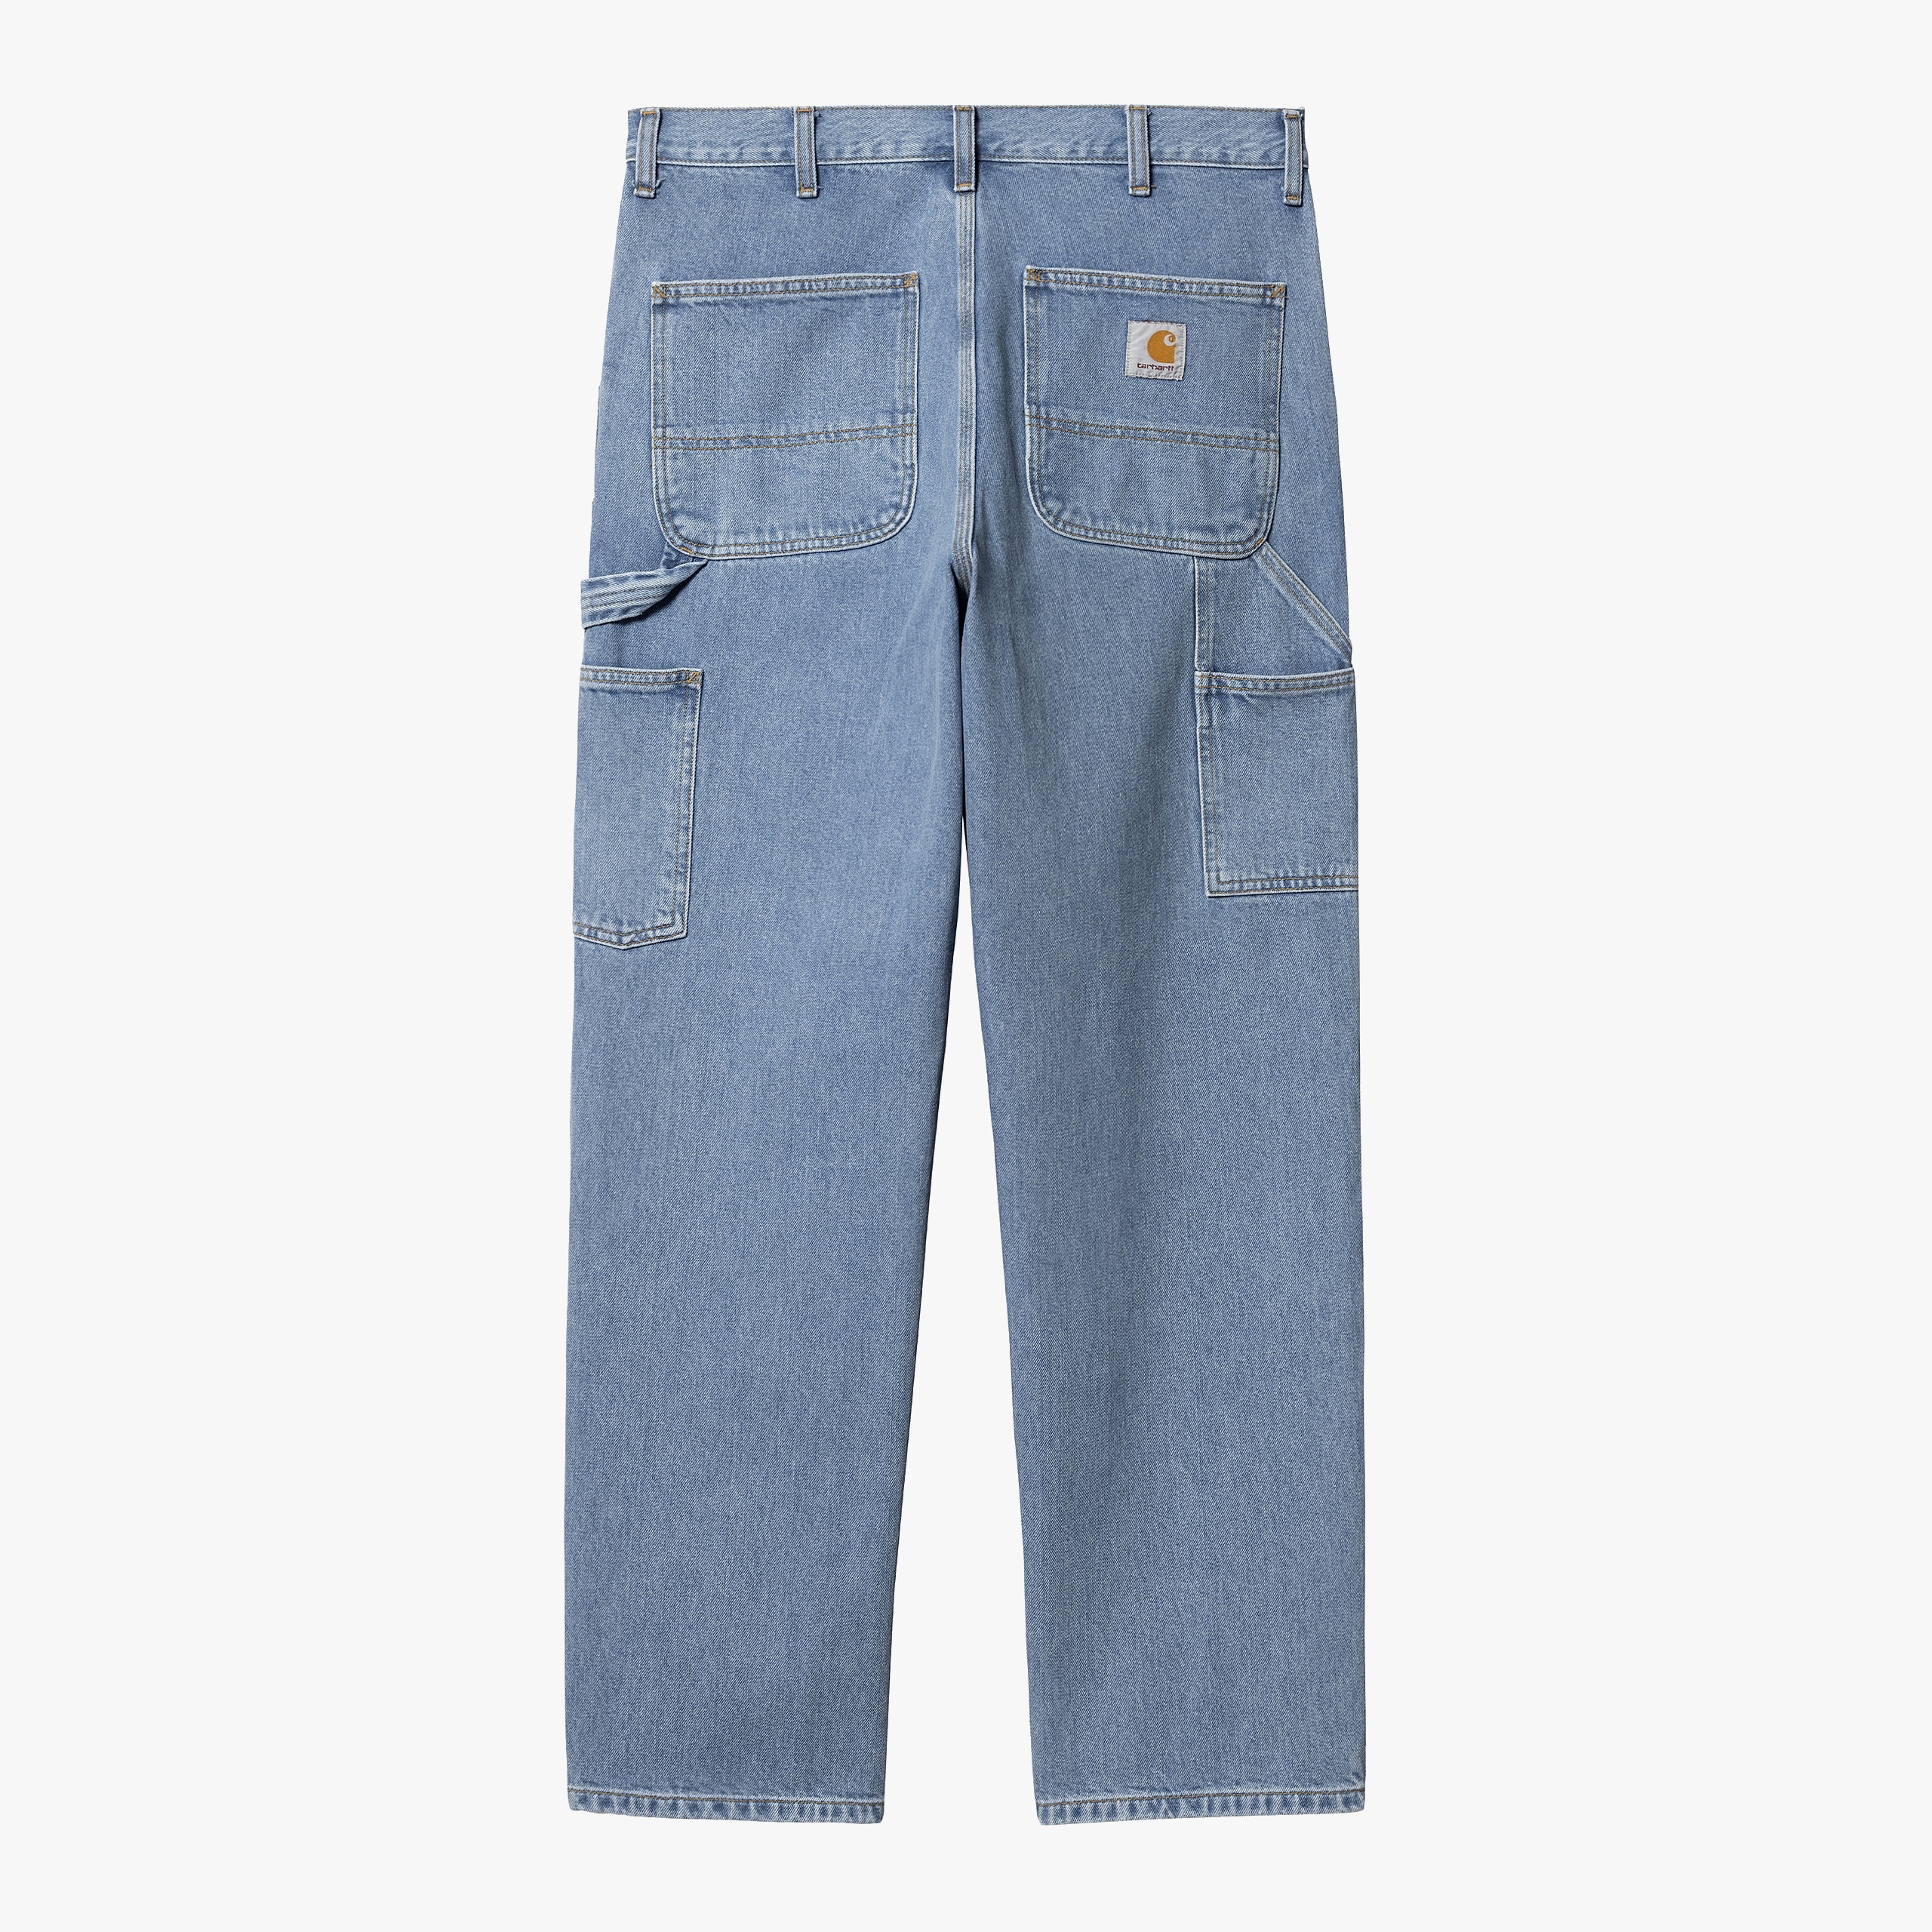 CARHARTT WIP DOUBLE KNEE PANT BLUE STONE BLEACHED